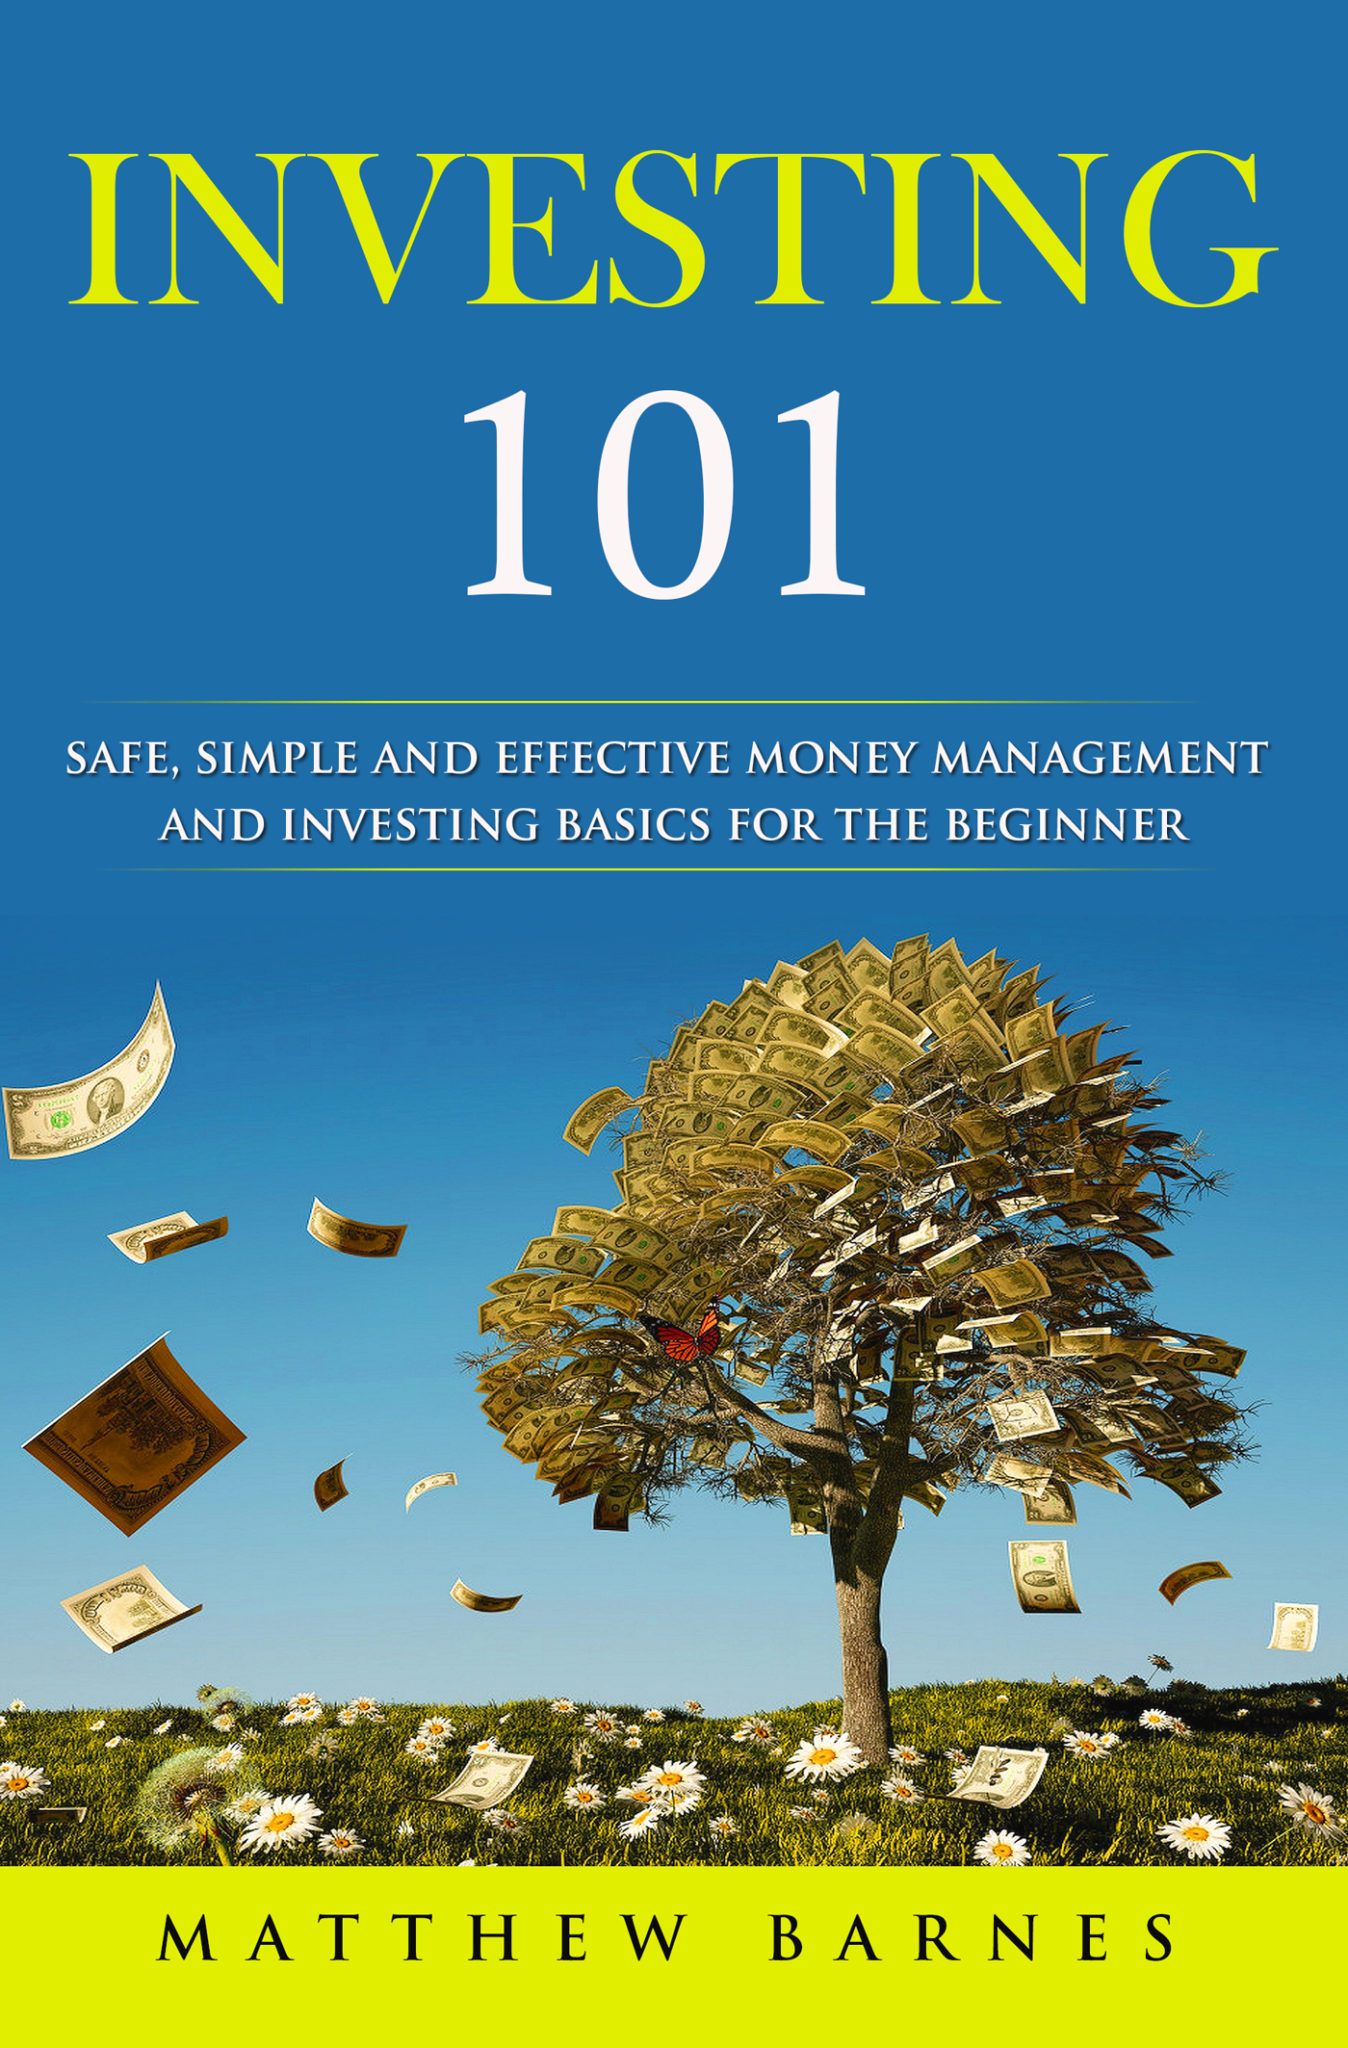 FREE: Investing 101: Safe, Simple and Effective Money Management and Investing Basics for the Beginner by Matthew Barnes